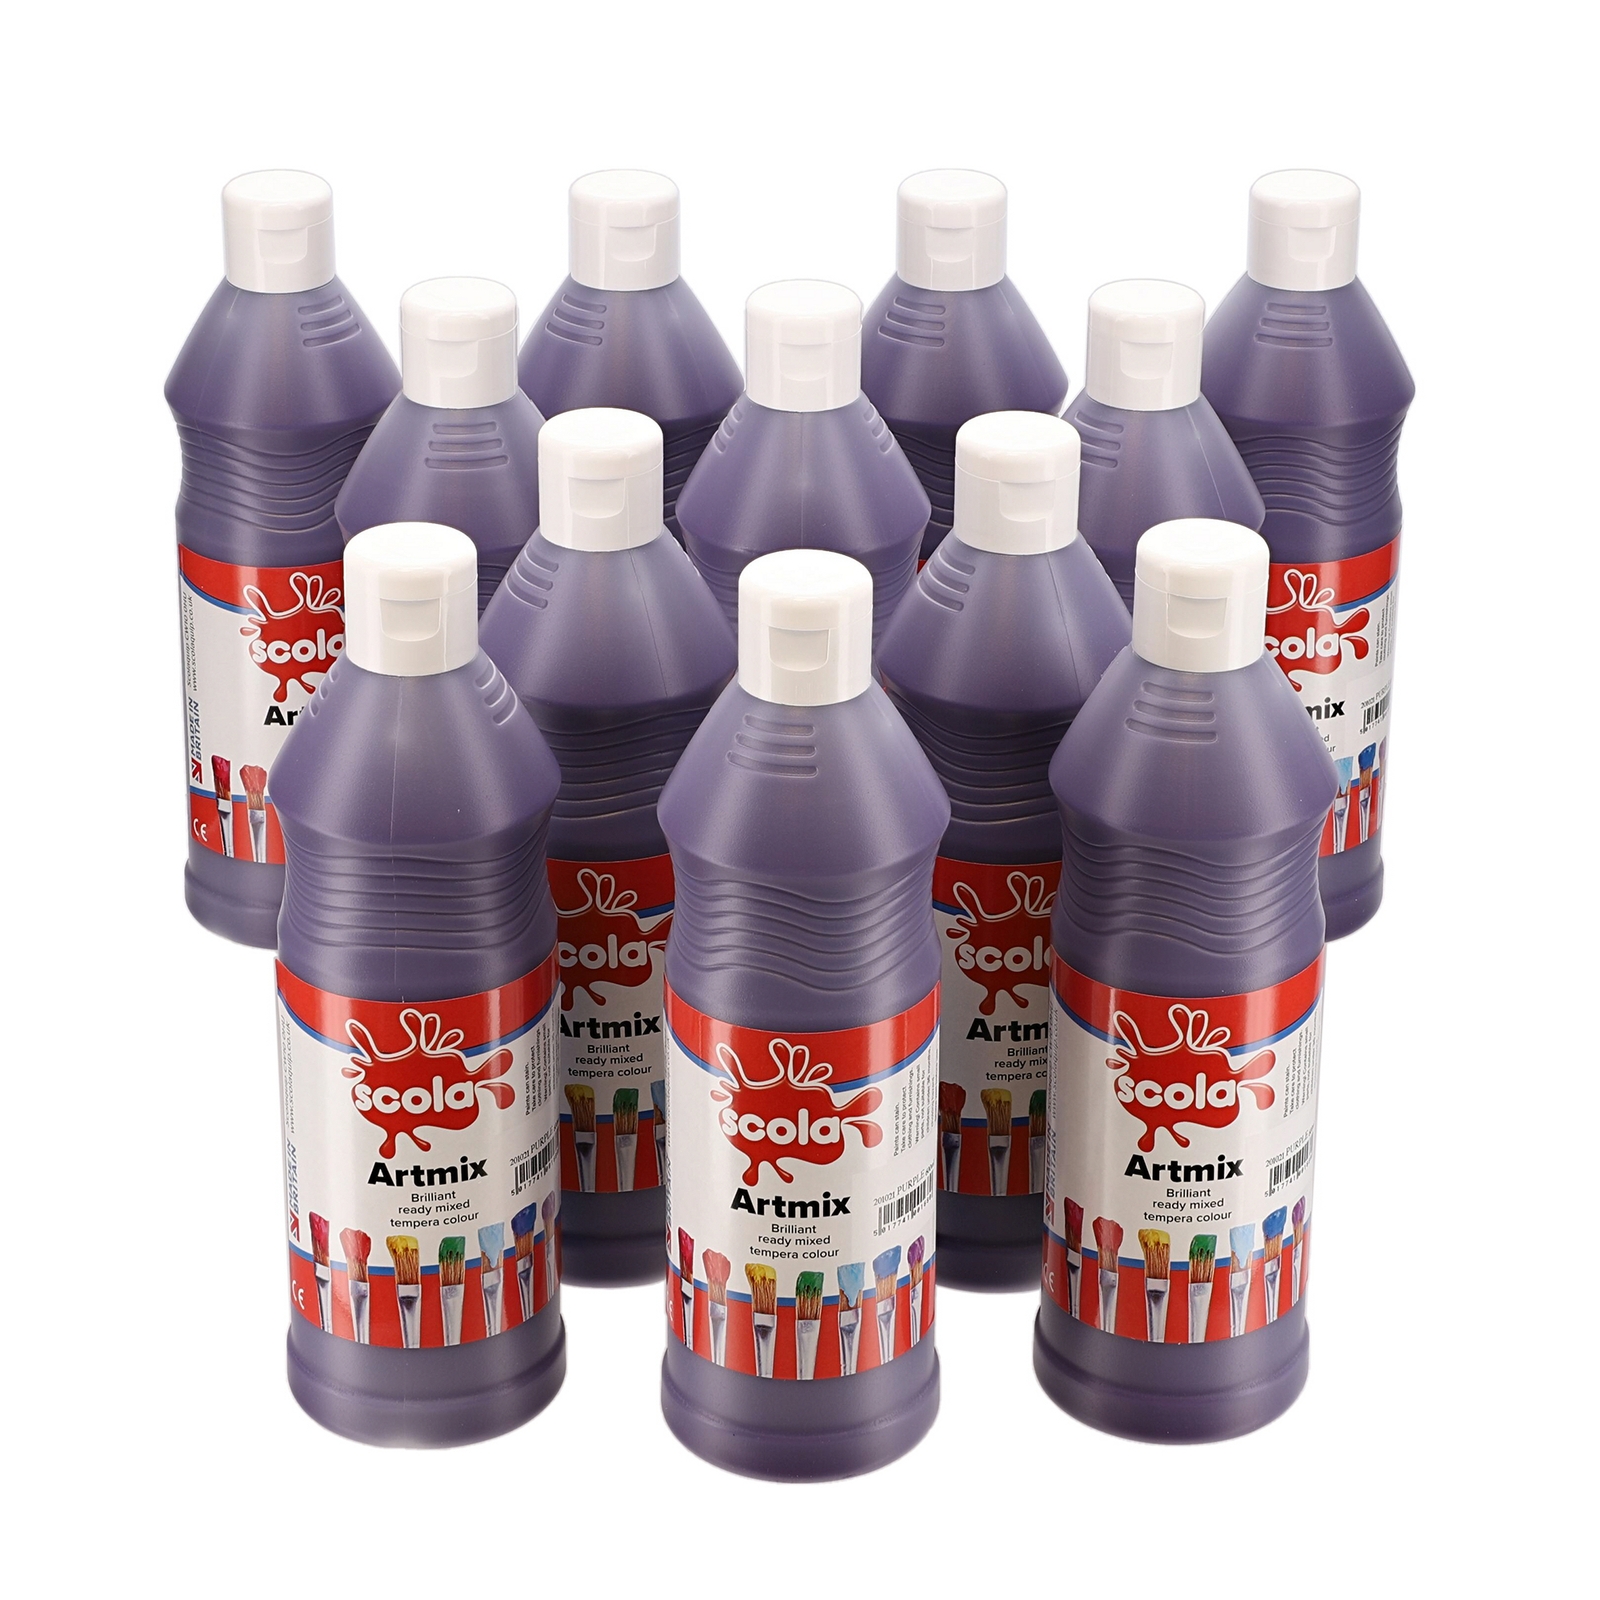 Scola Purple Artmix Ready Mixed Paint - 600ml - Pack of 12